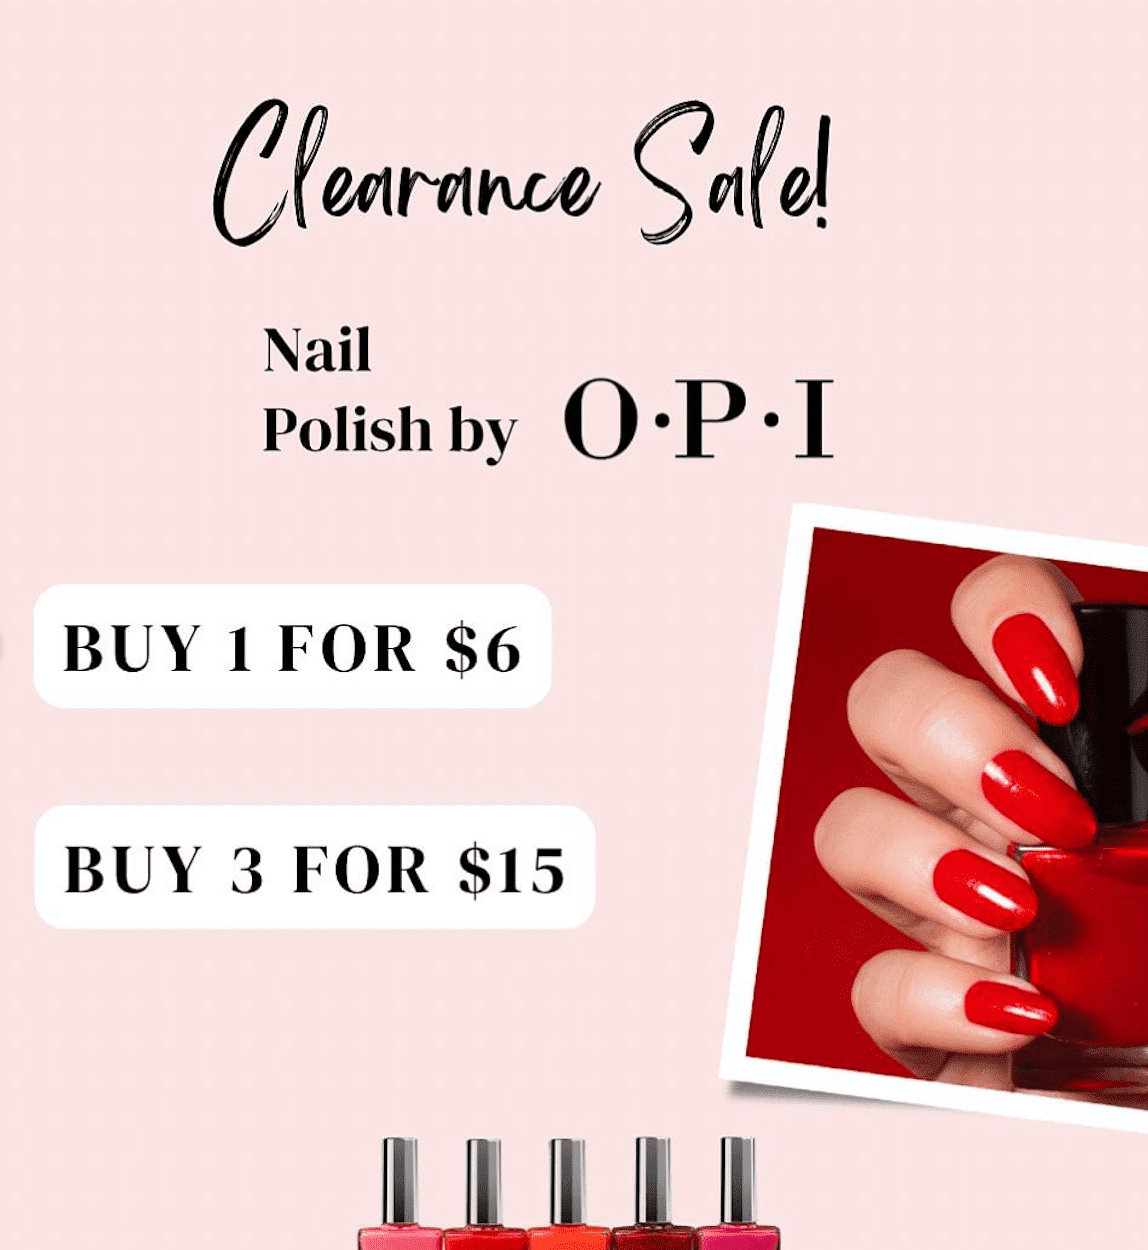 Advertisement for O.P.I nail polish clearance sale with pricing details.